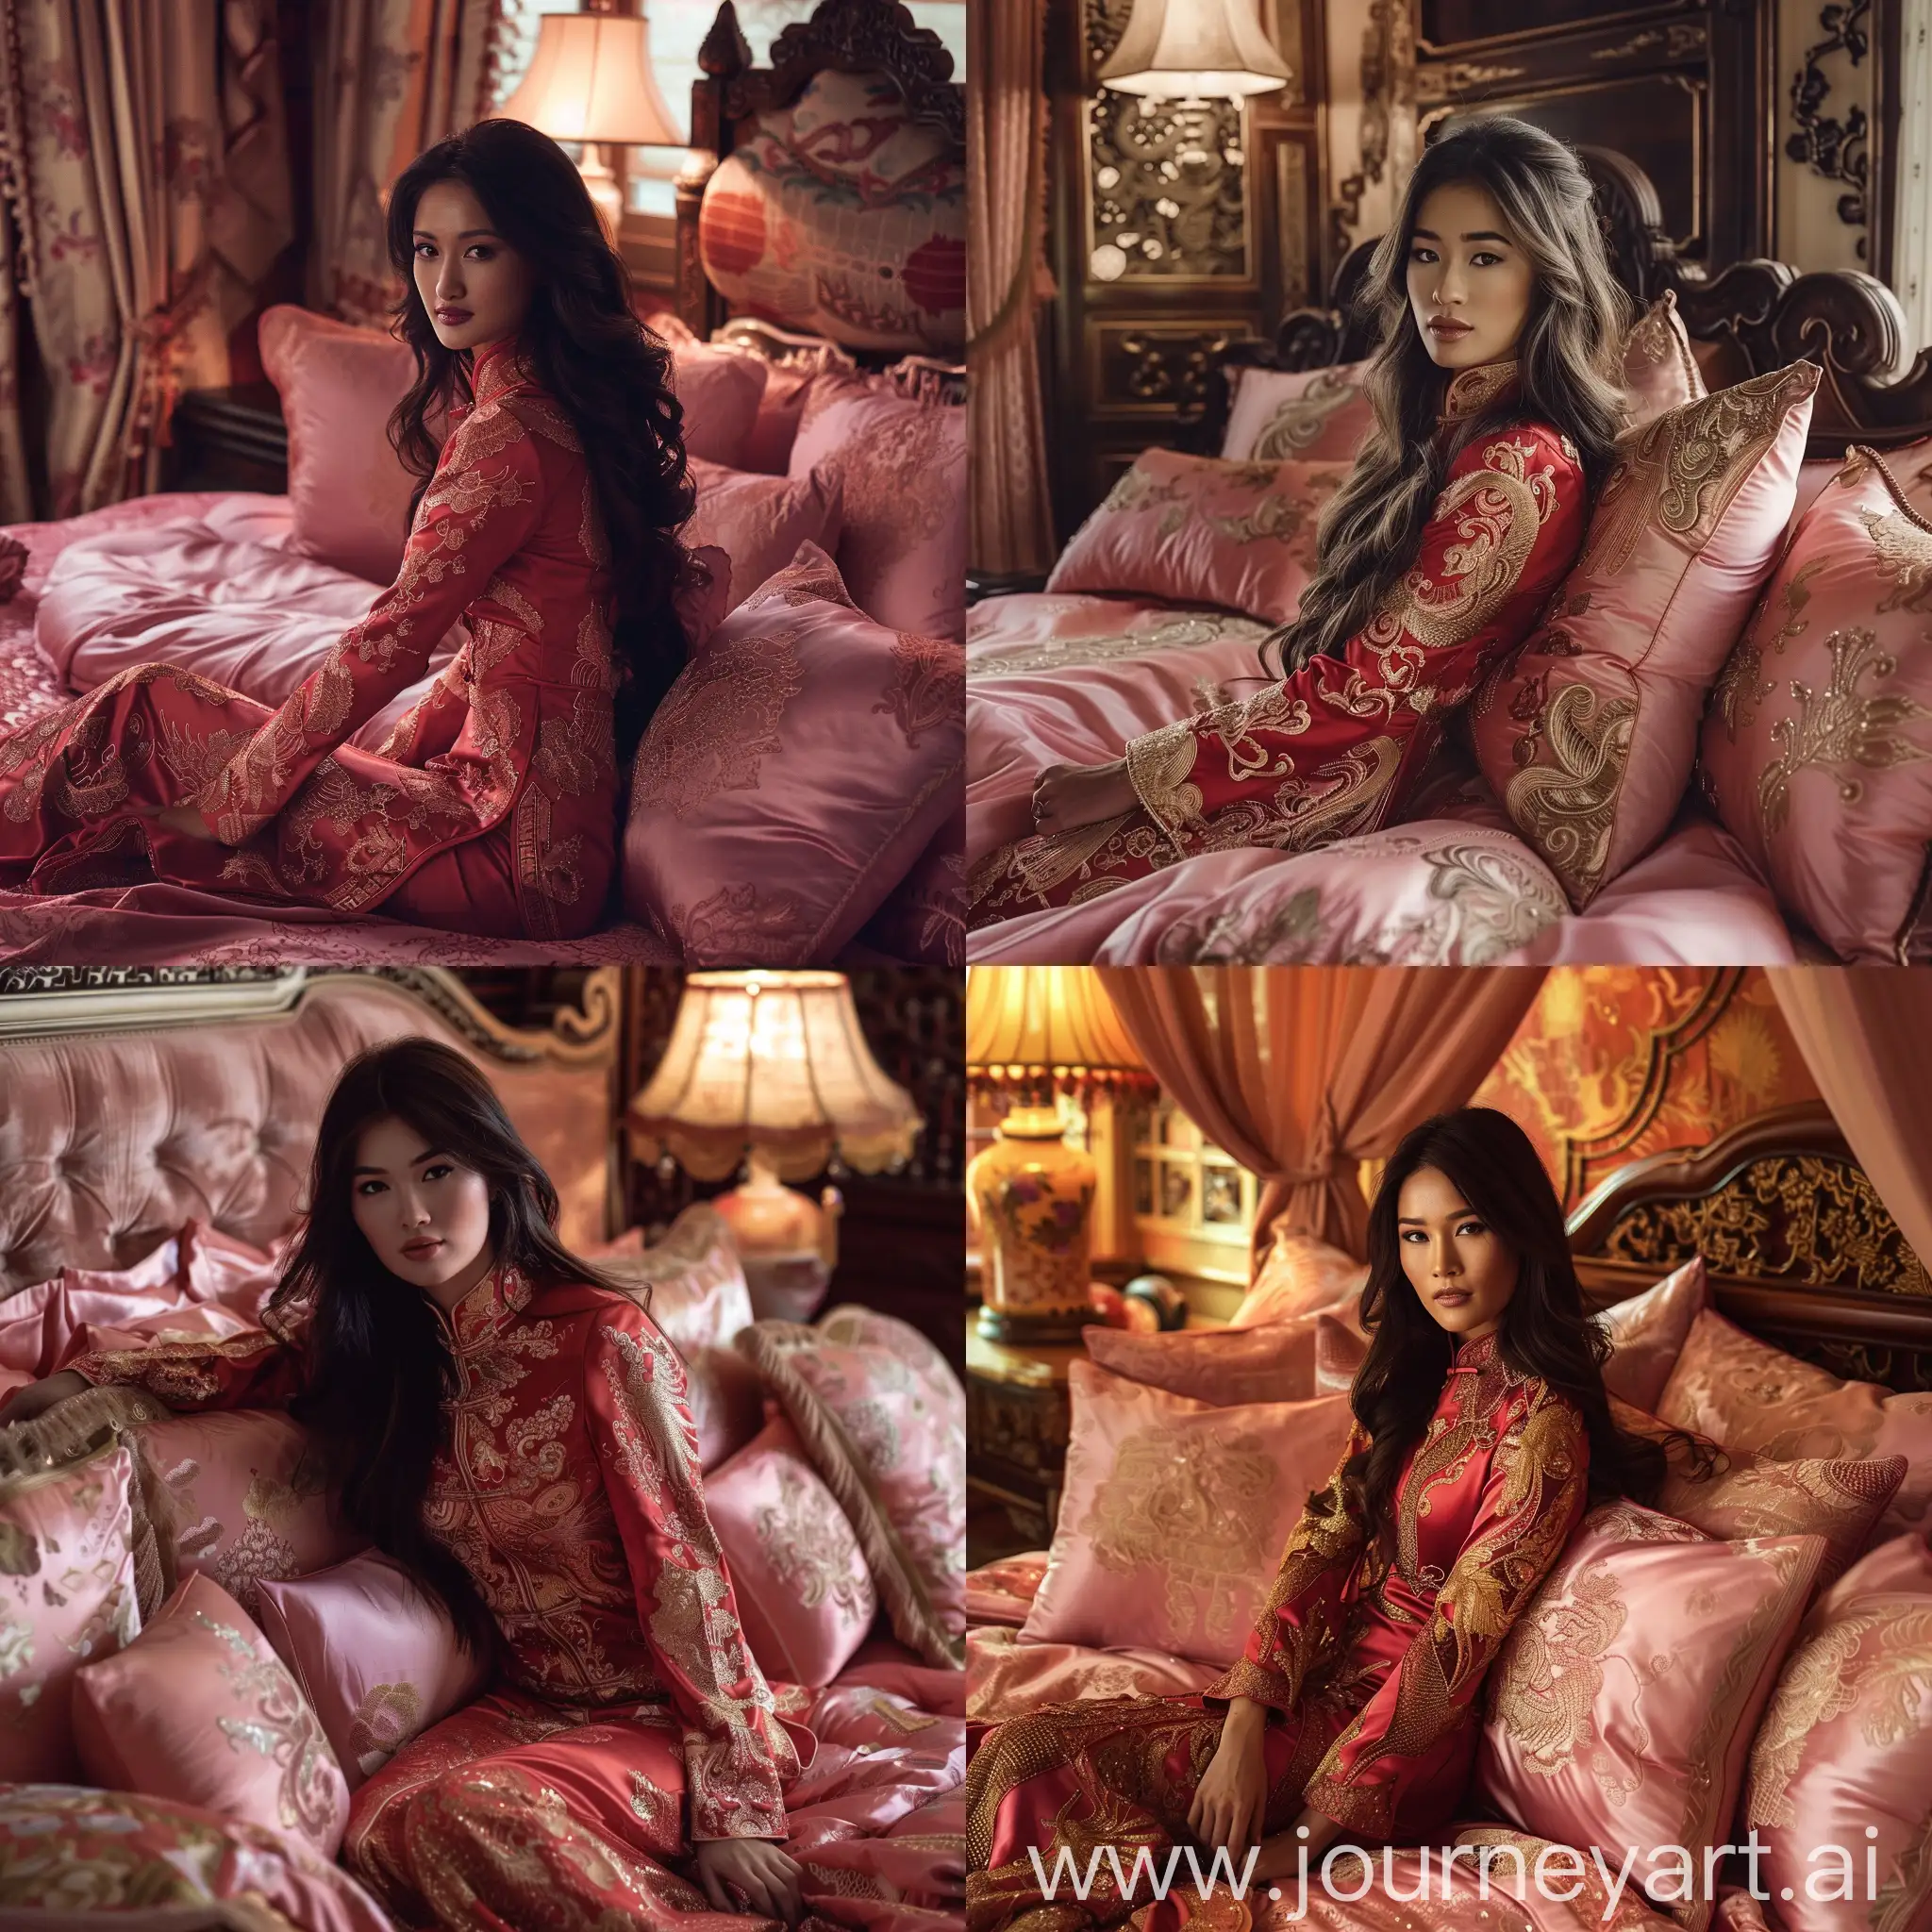 A beautiful woman in a cheongsam, sitting on a luxurious pink silk wedding bed, leaning against opulent silk pillows. She is wearing a stunning red cheongsam adorned with intricate gold patterns. The wedding bed is decorated with pink silk bedding and pillows, featuring ornate designs and textures. The woman has long, dark hair styled elegantly and she has a serene and graceful expression. The room has warm lighting and is richly decorated, emphasizing a traditional Chinese wedding setting with a modern twist.